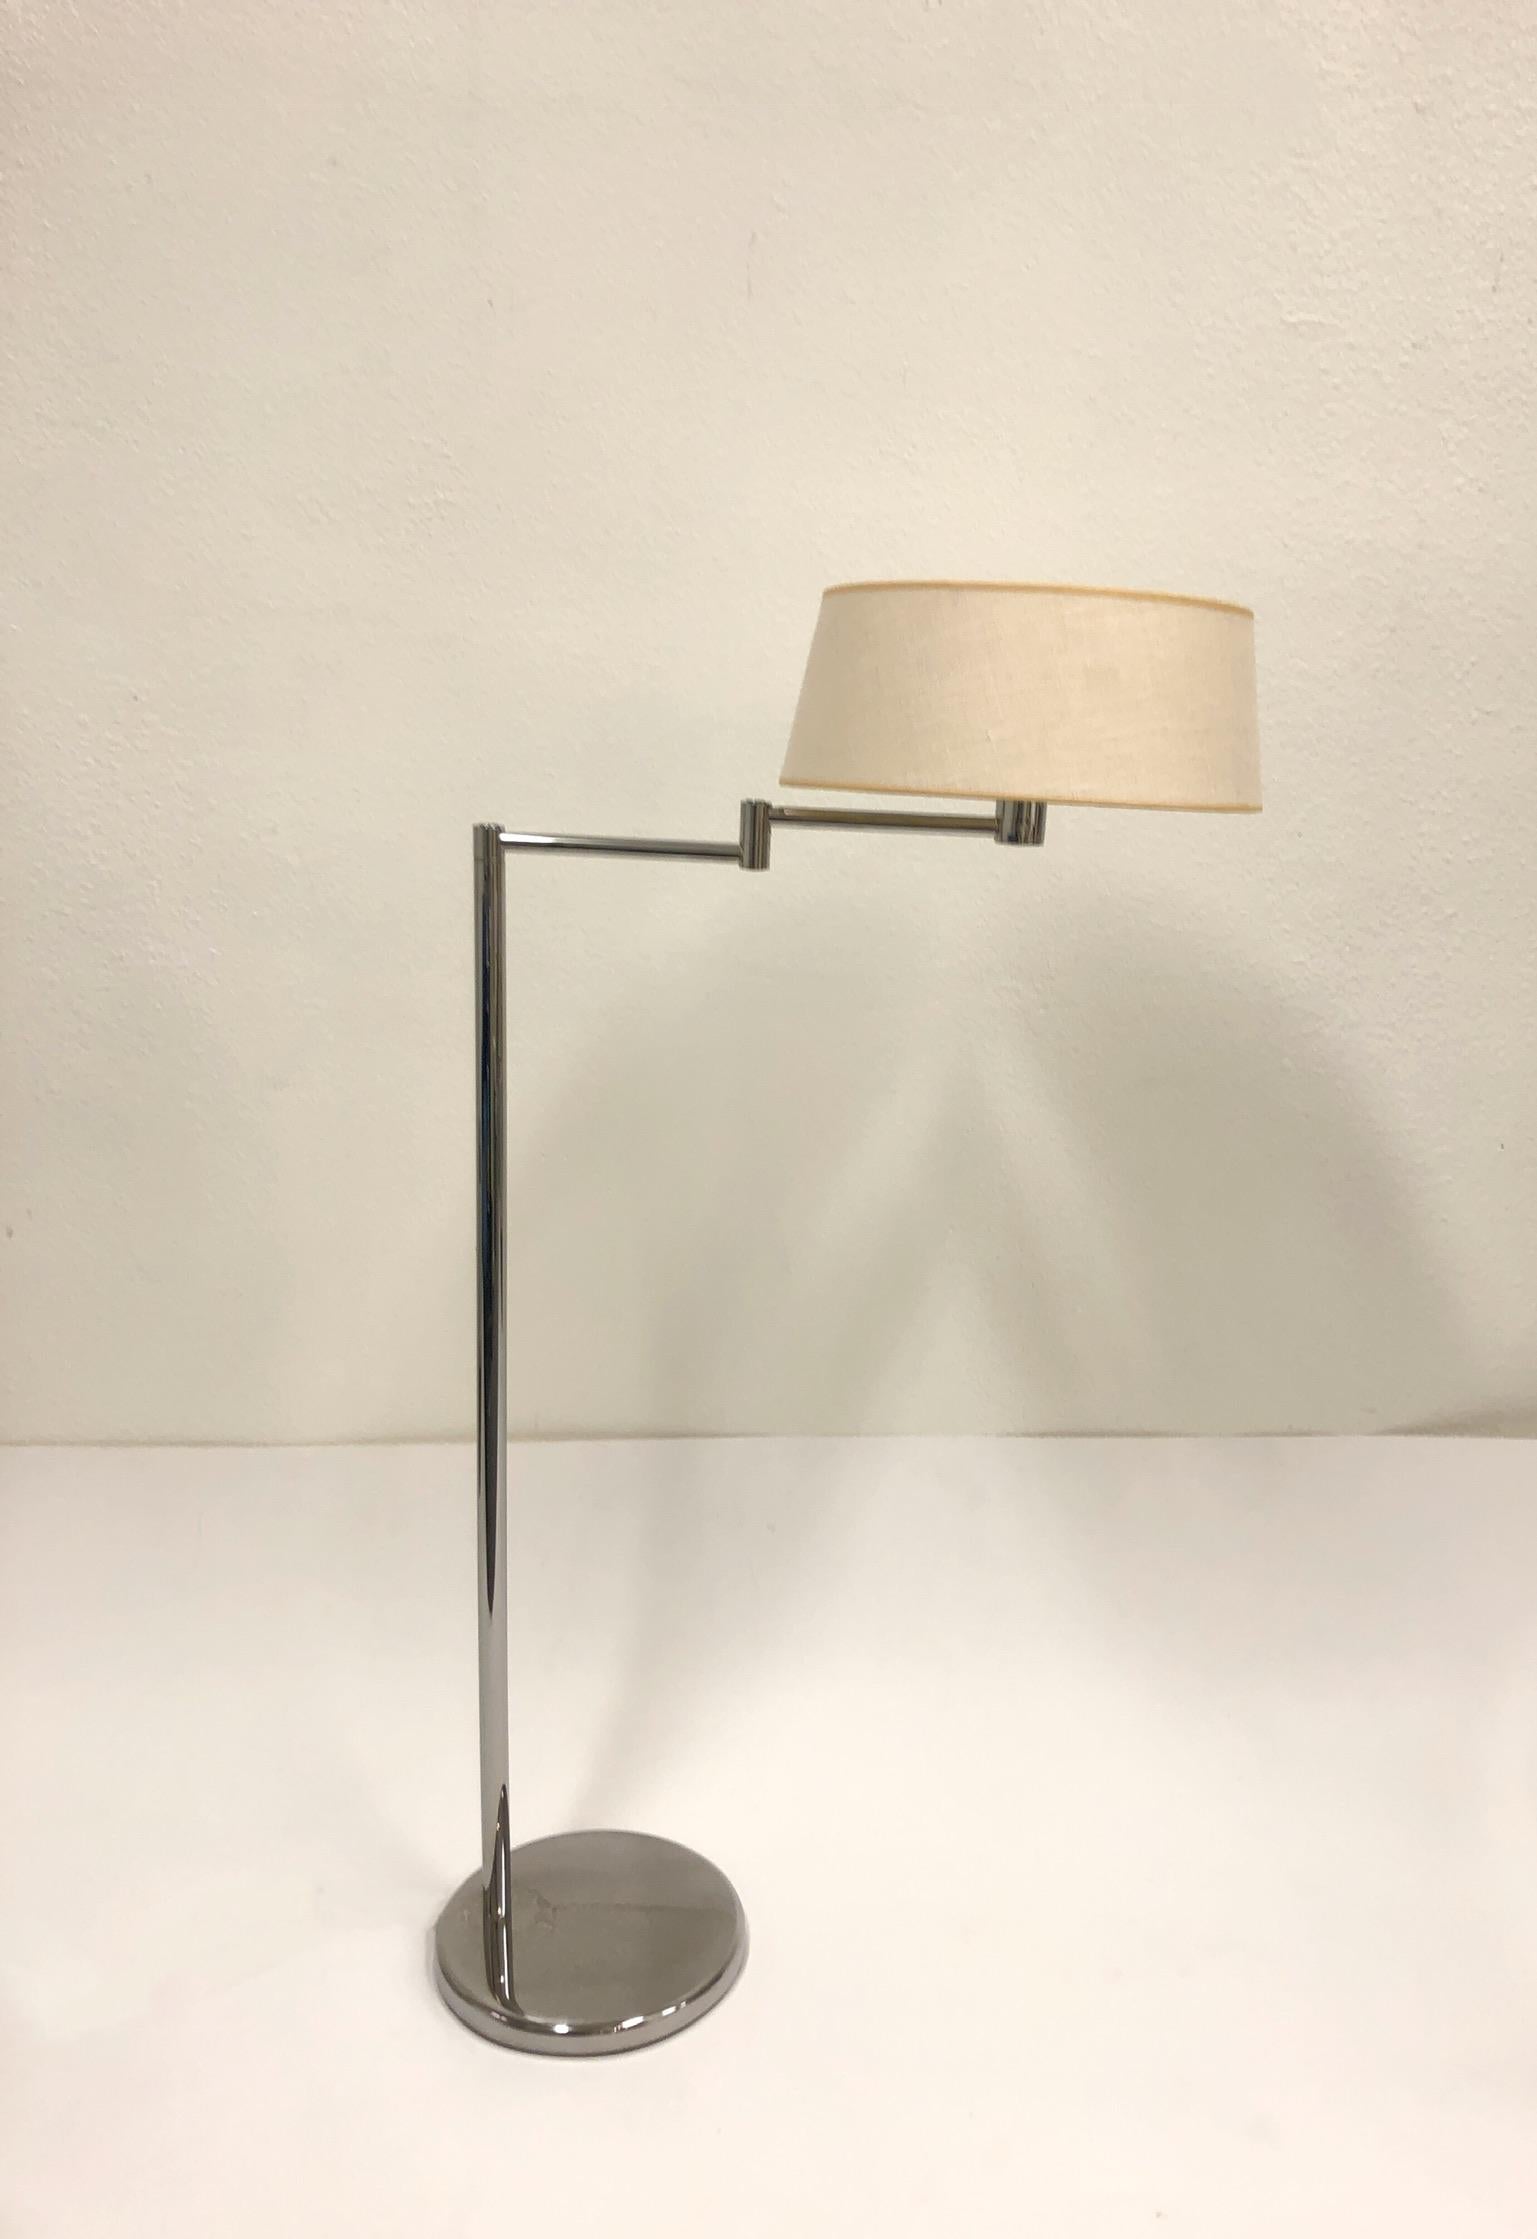 A 1970s polish chrome with a vanilla linen shade adjustable floor lamp by Walter Von Nessen for Nessen Studios. The lamp has a swing arm and it raises up and down. Newly rewired. 
Dimensions: 47.25” high, 26.5” wide (when arm is extended) 15” deep.